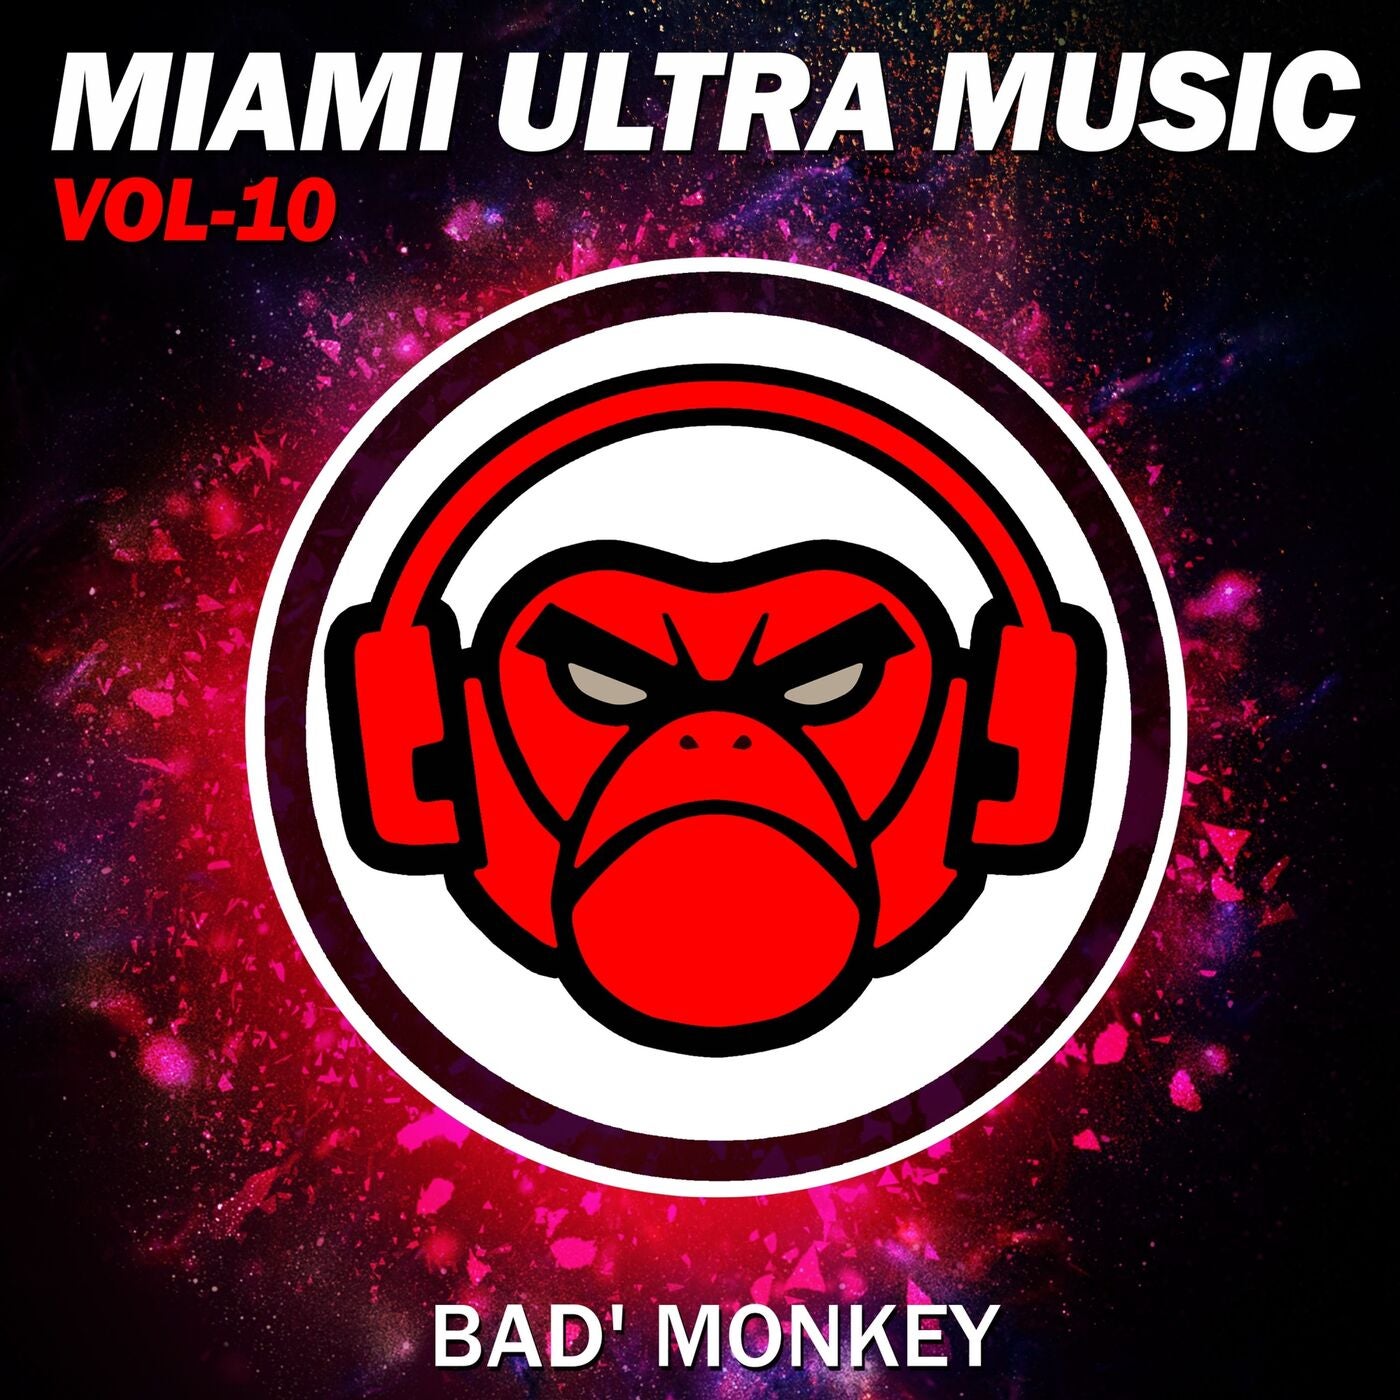 Miami Ultra Music, Vol.10, compiled by Bad Monkey